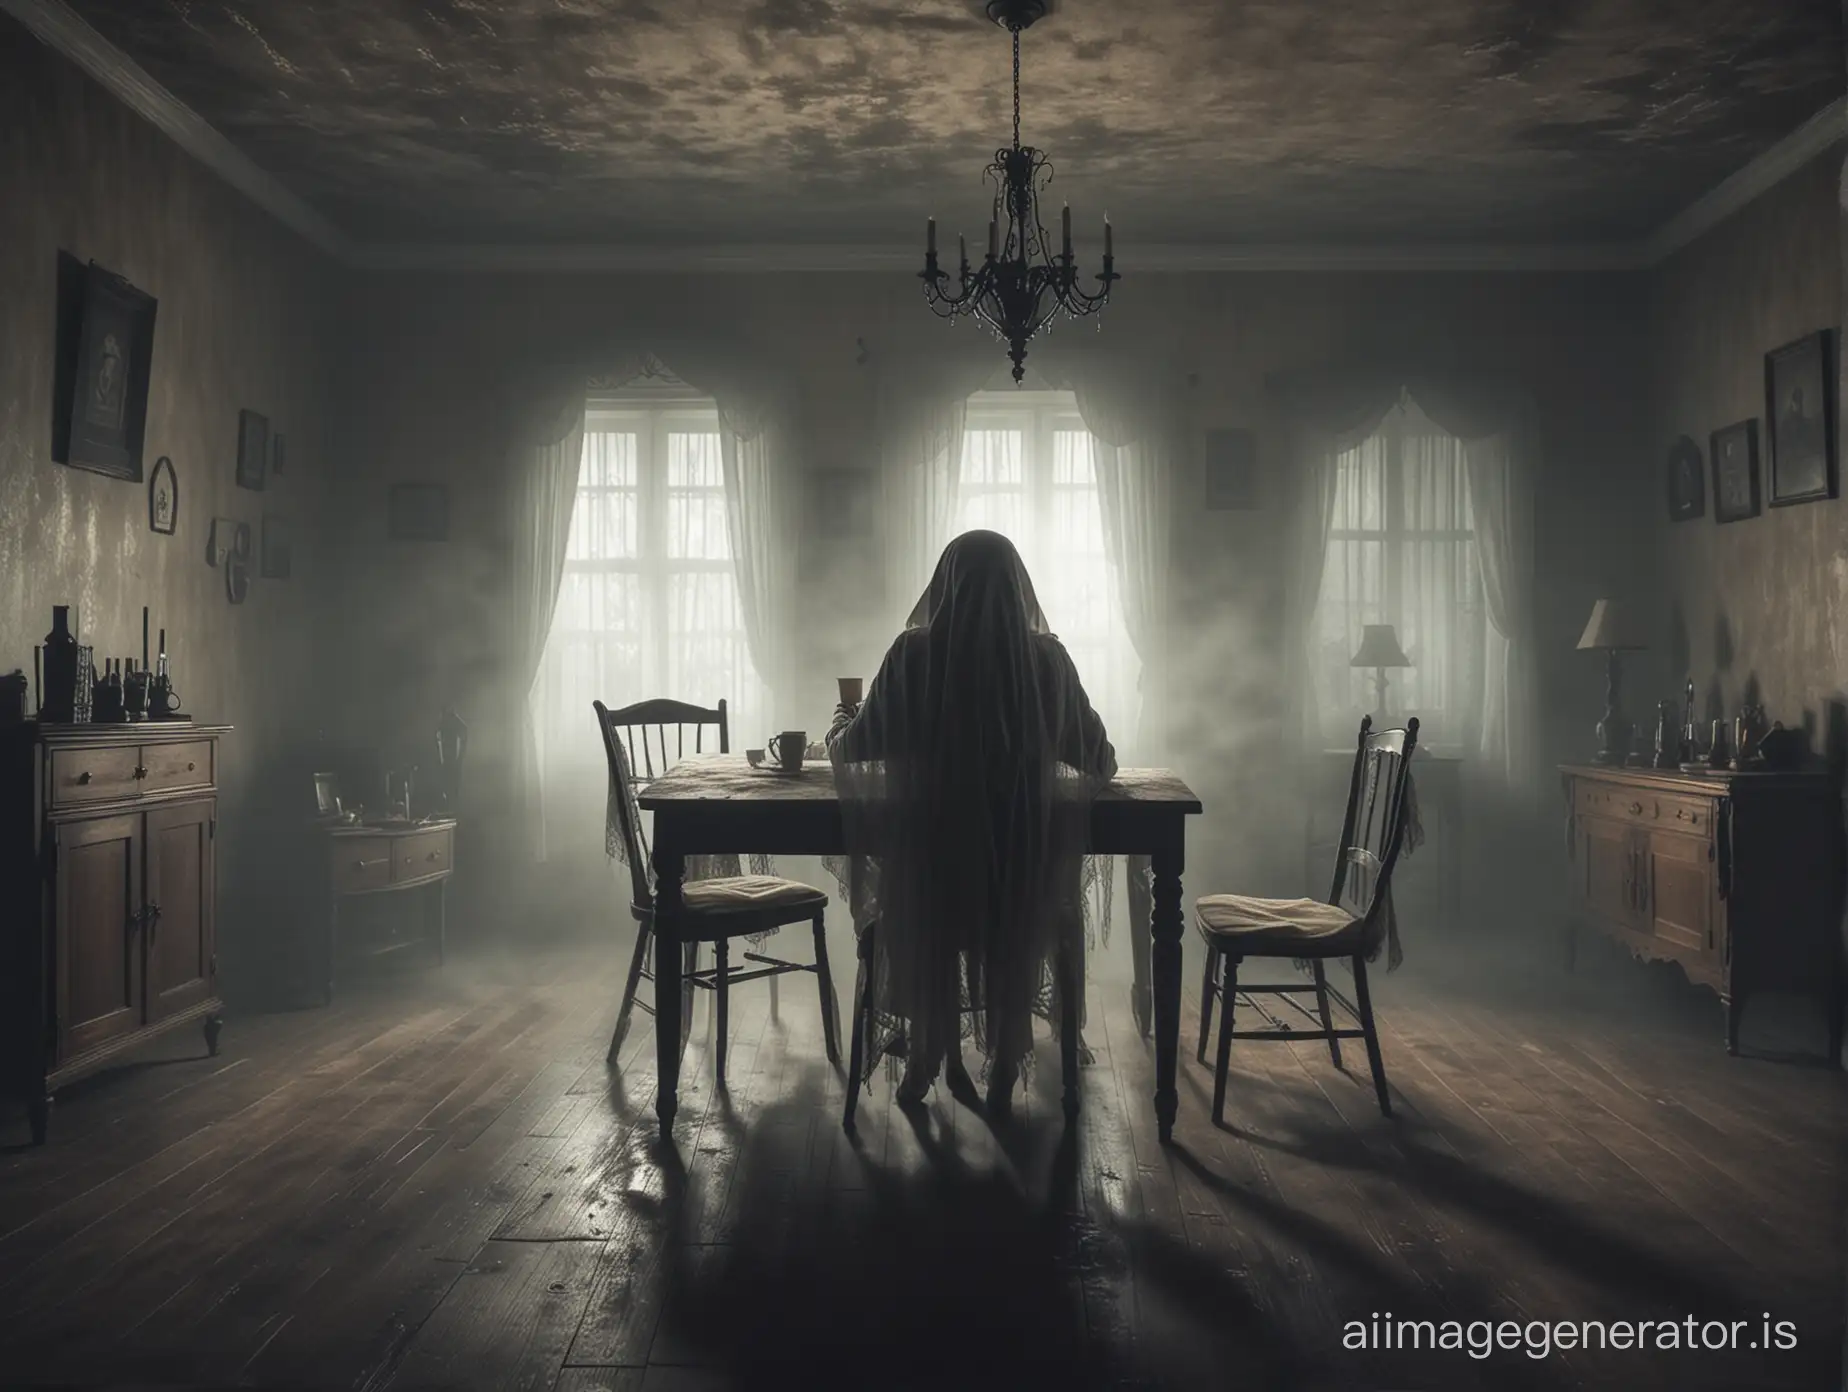 Eerie-Night-Scene-Haunted-Room-with-Ghostly-Presence